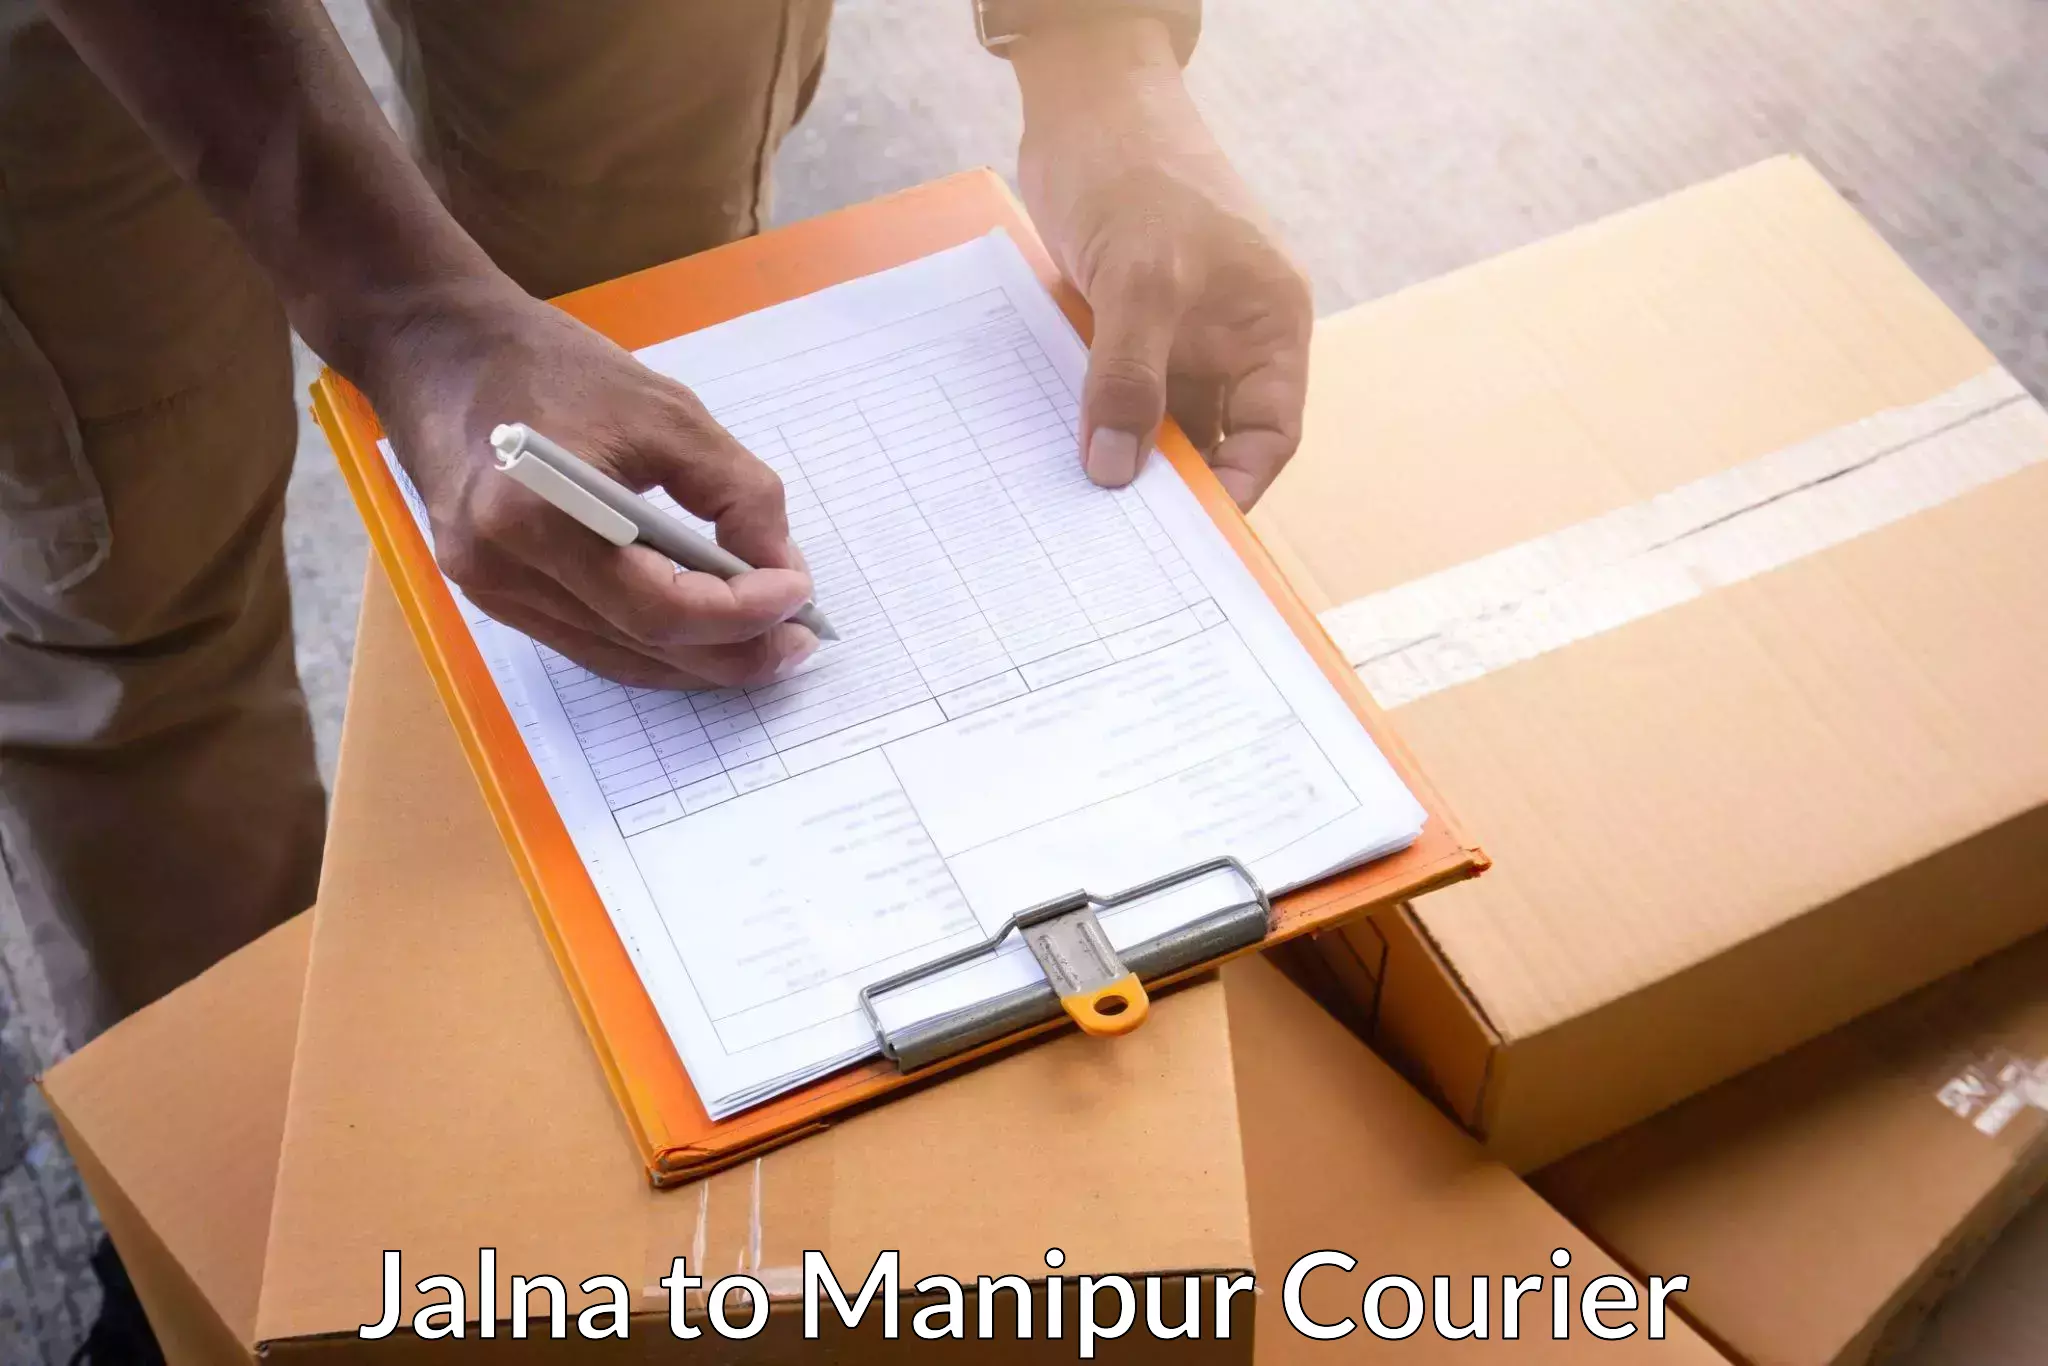 Professional courier handling Jalna to Manipur